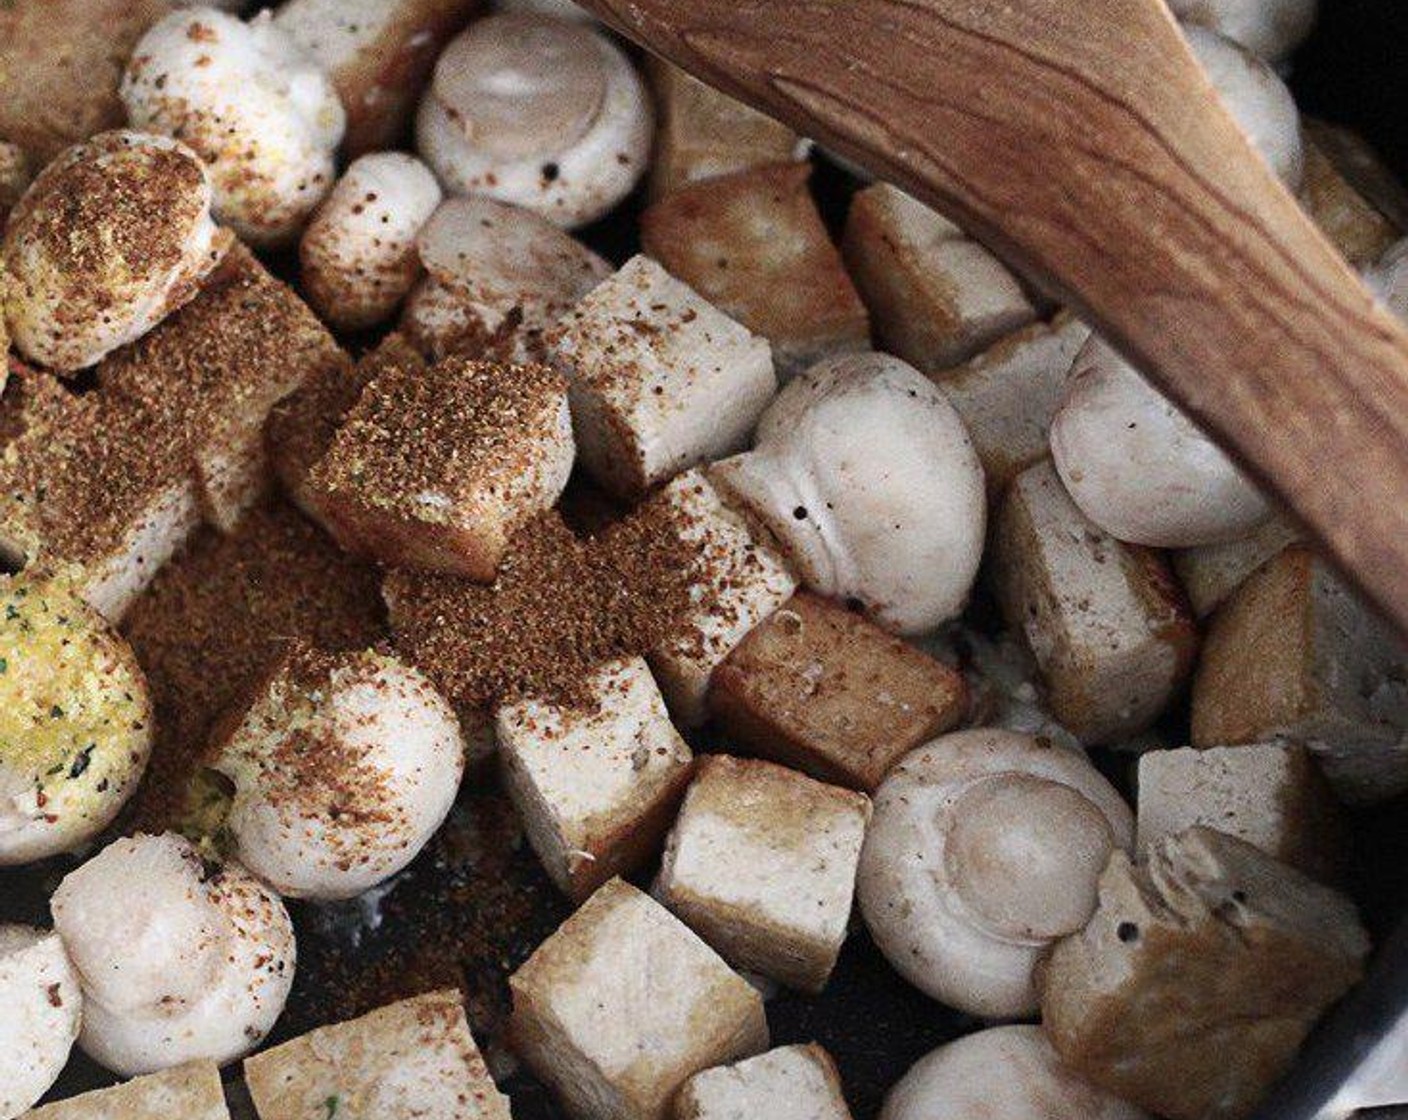 step 2 Add in Button Mushrooms (1 1/2 cups), Garlic (2 cloves), Vegetable Bouillon Cube (1 tsp), Jerk Seasoning (1/2 Tbsp), and Salt (1/2 tsp), stir-fry them gently for another 5 minutes, set aside. And allow to cool for 5 minutes.